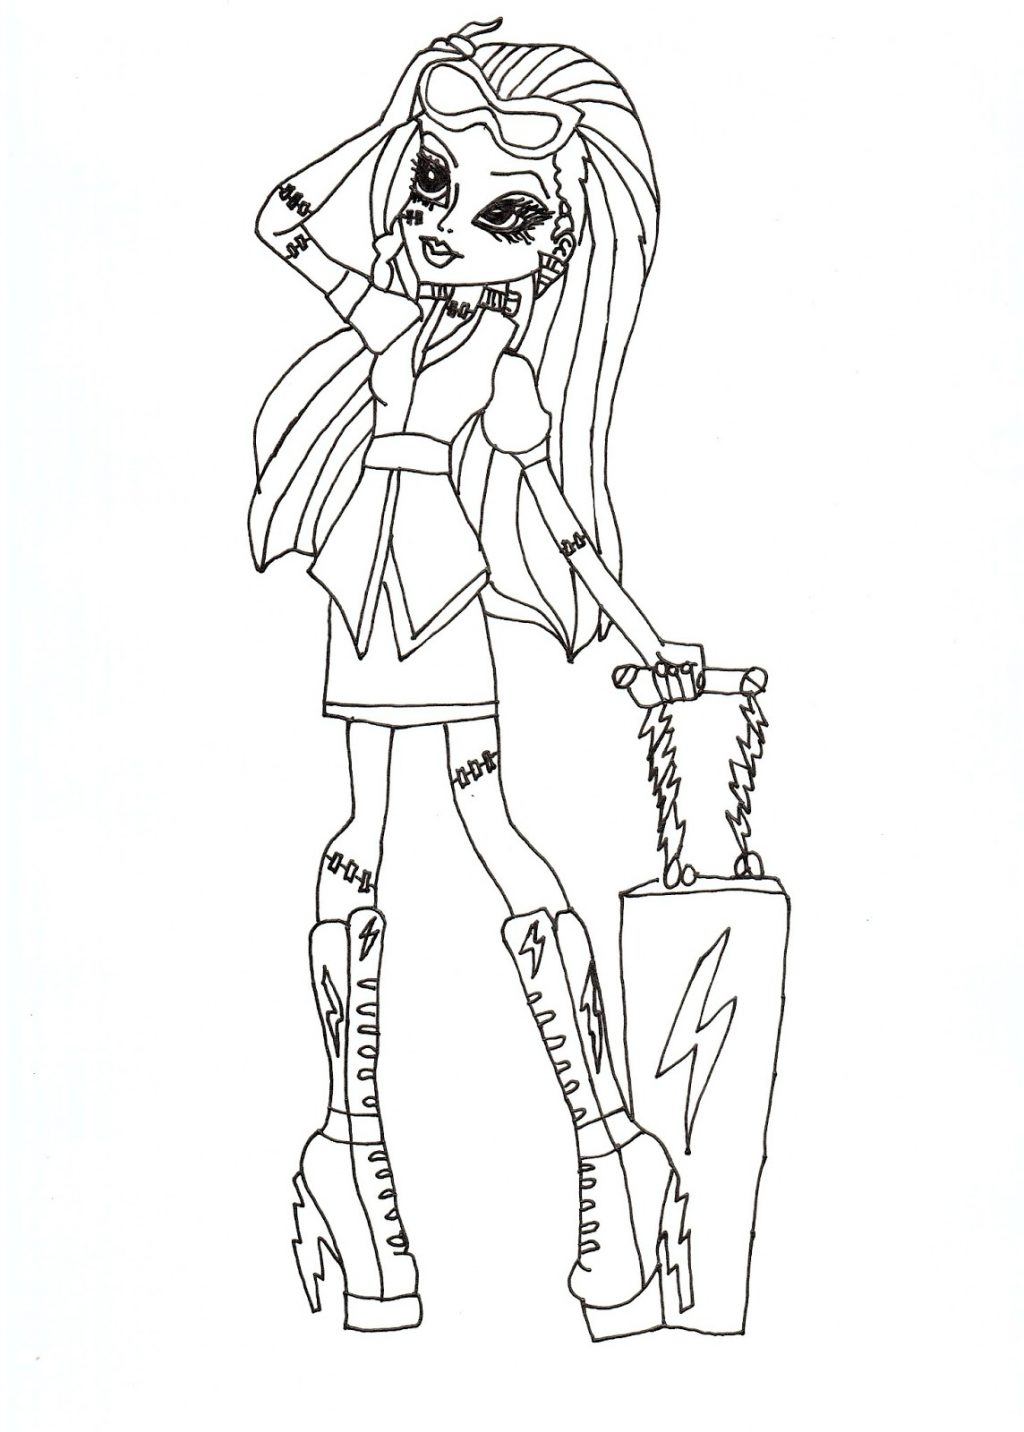 Monster High Coloring Pages Free Printable Coloring Ideas Free Printable Monster High Coloring Pages For Kids